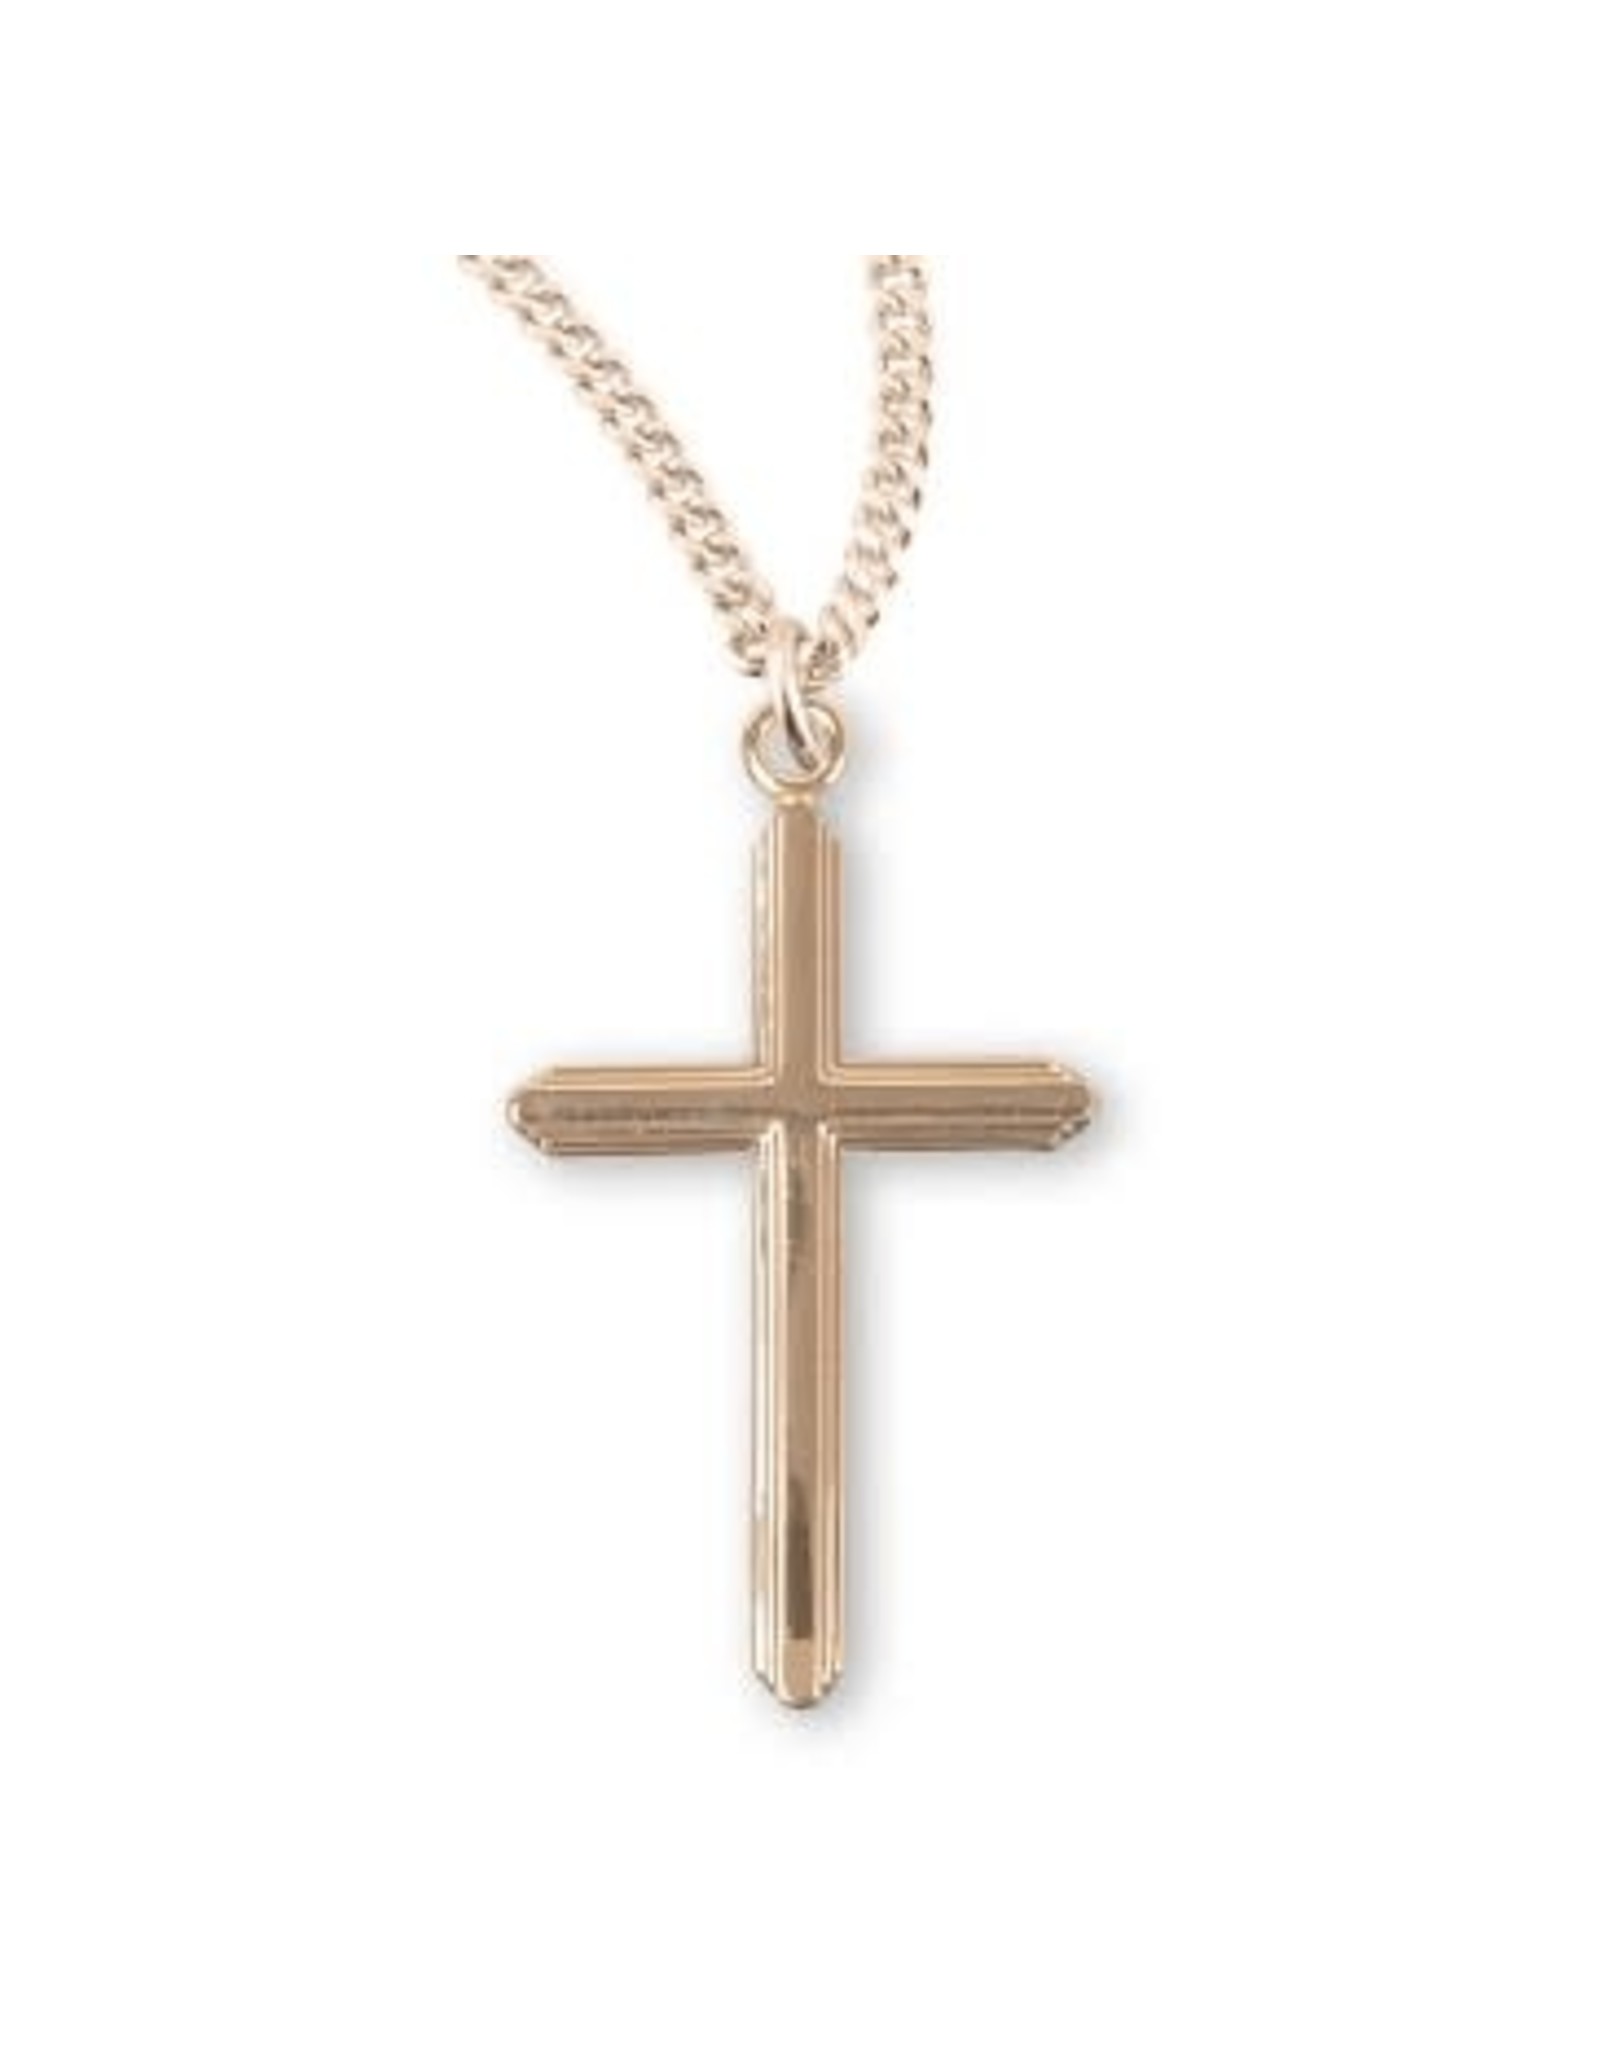 HMH Cross Medal, Gold Over Sterling Silver, 18" Chain